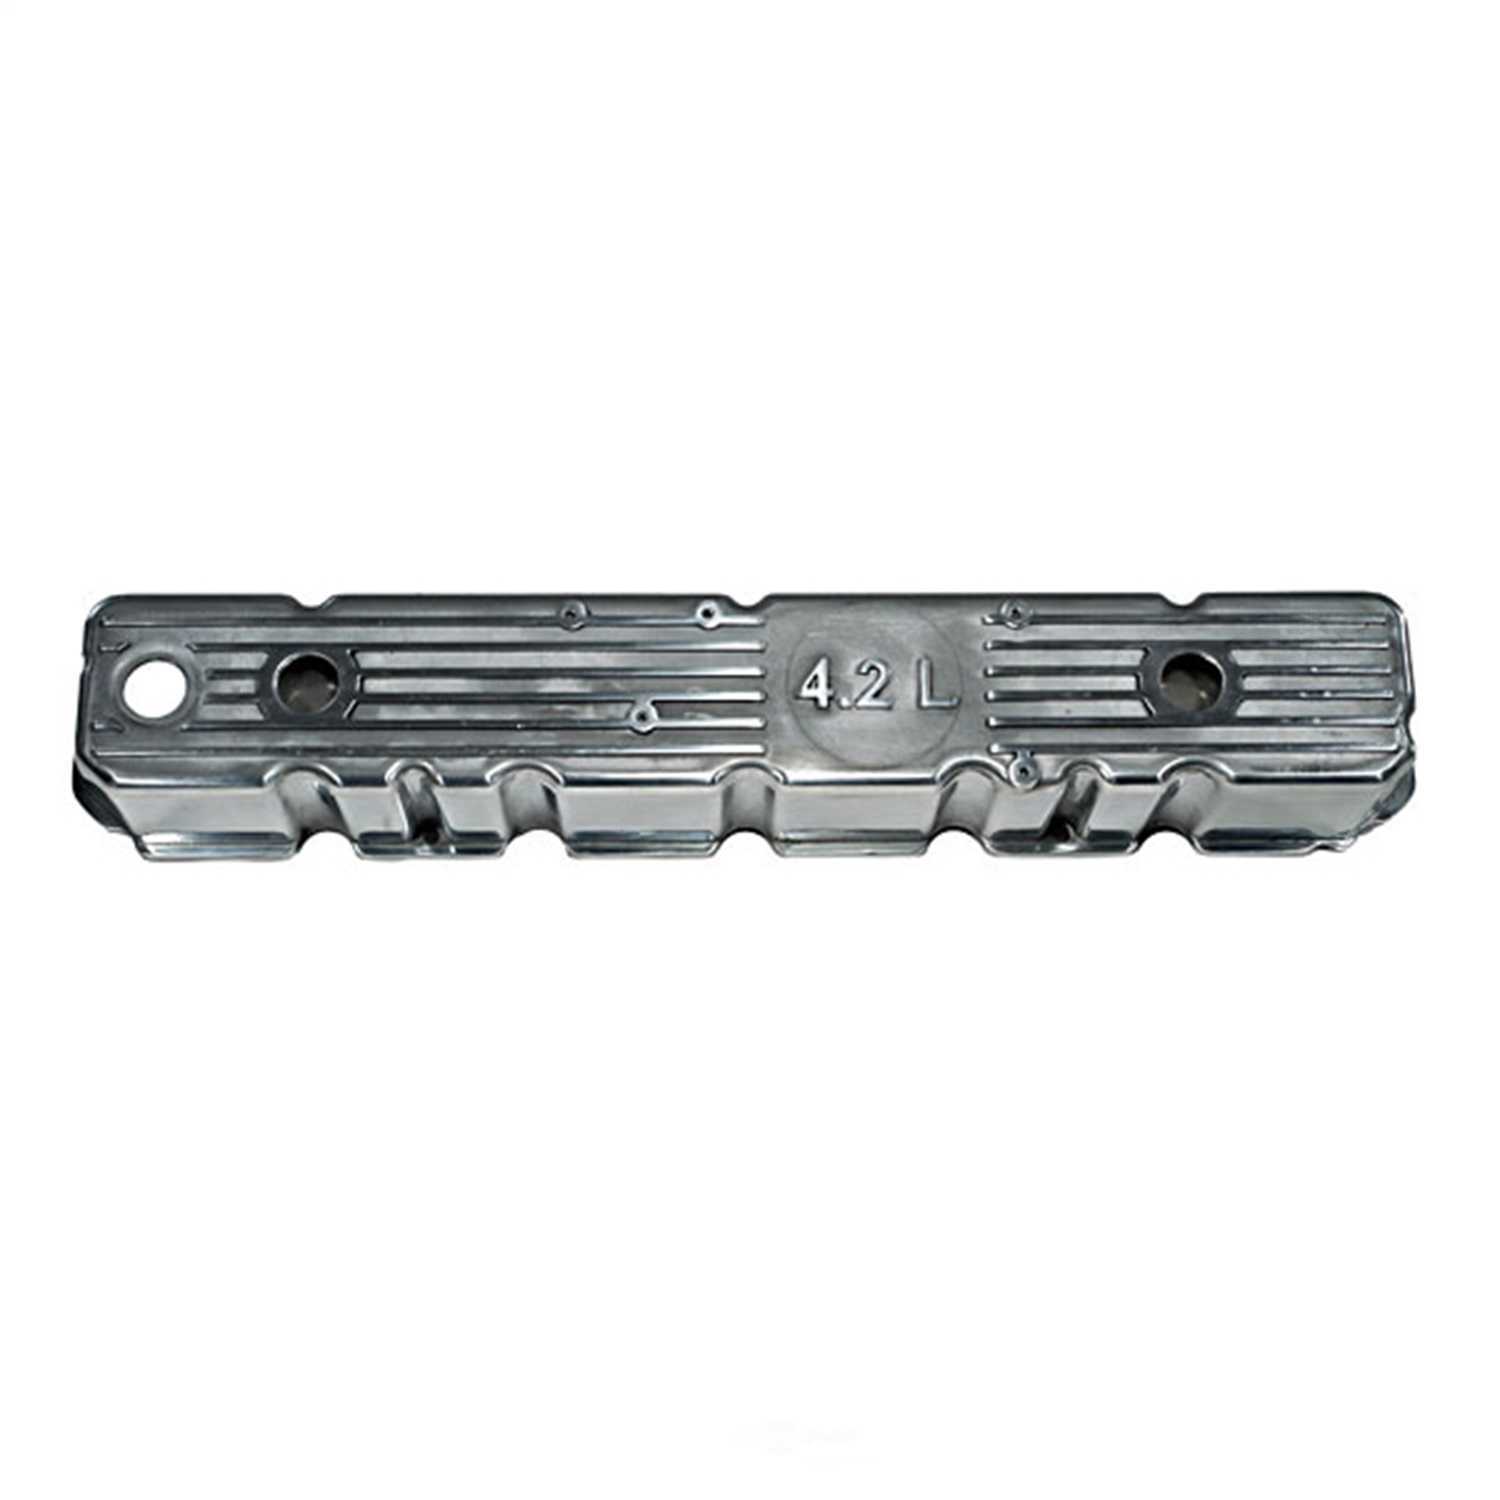 OMIX - Engine Valve Cover - OMX 17401.09